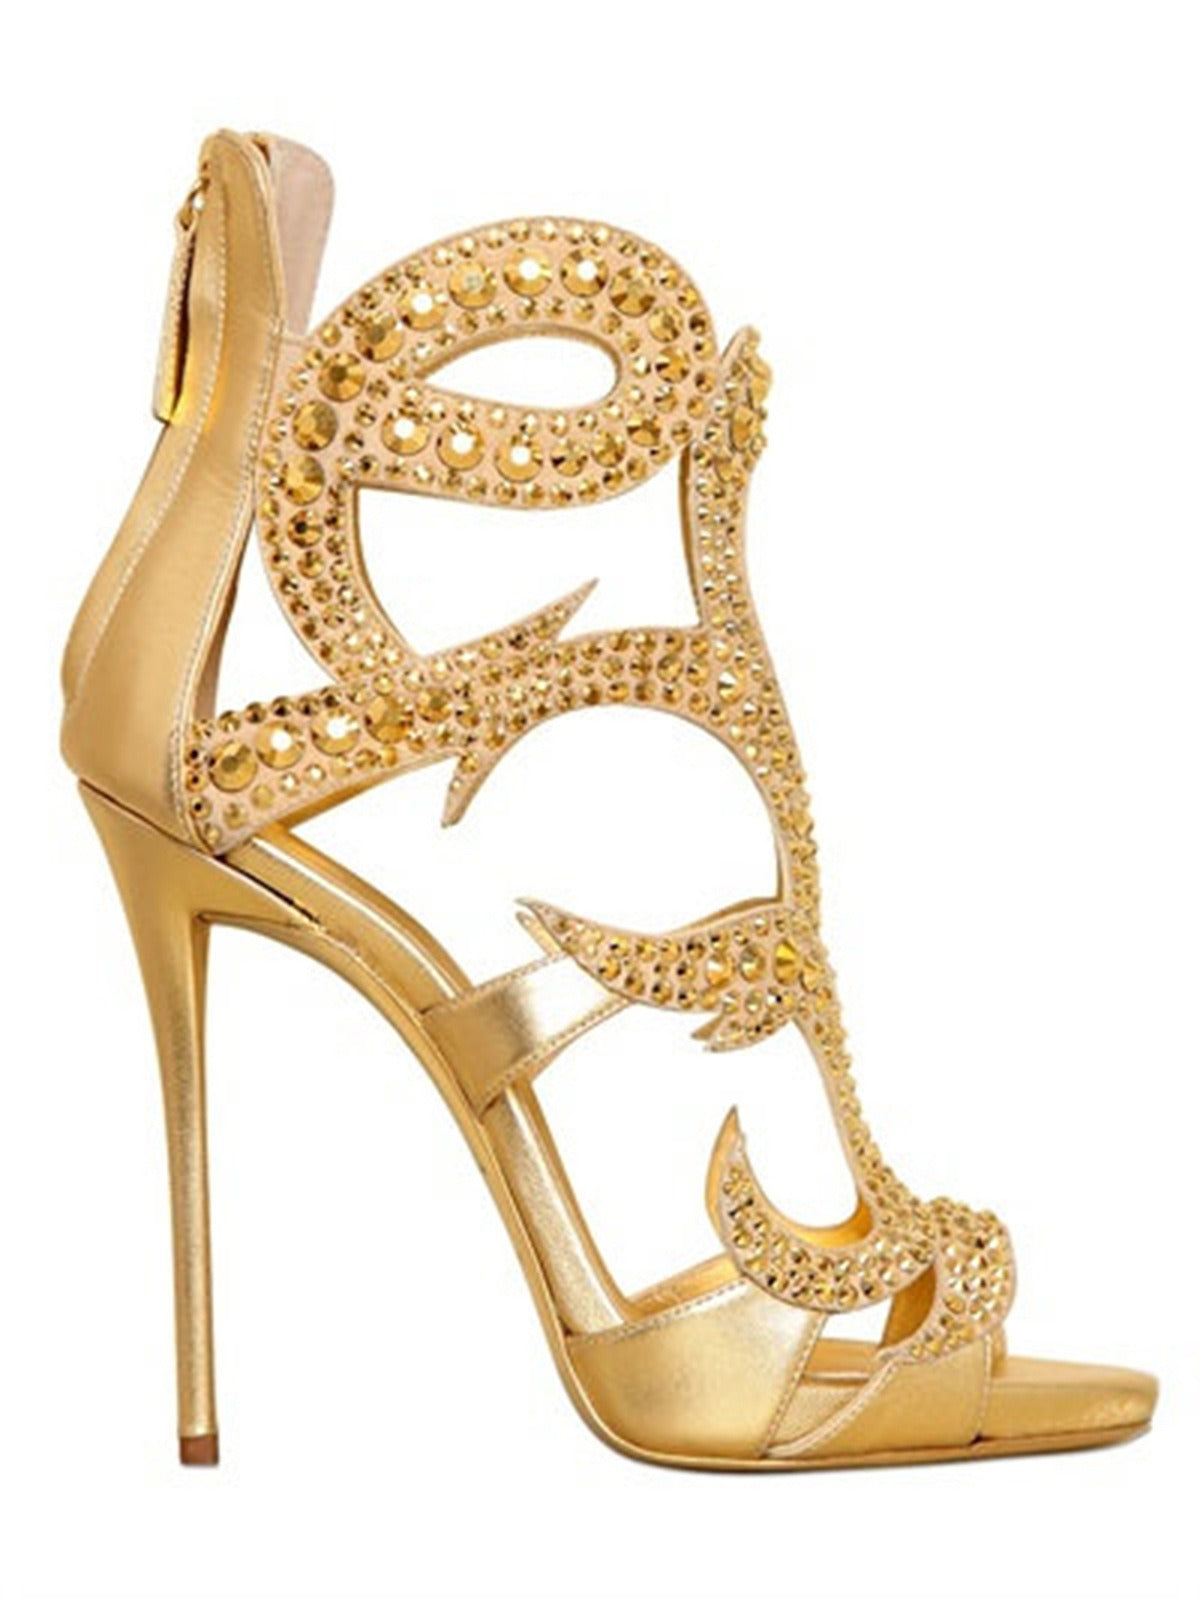 Sexy Luxury High Heel Sandals, Thin Heel Womens Shoes, Banquet Party Shoes, Gold Champagne, Water Diamond, and Fashionable